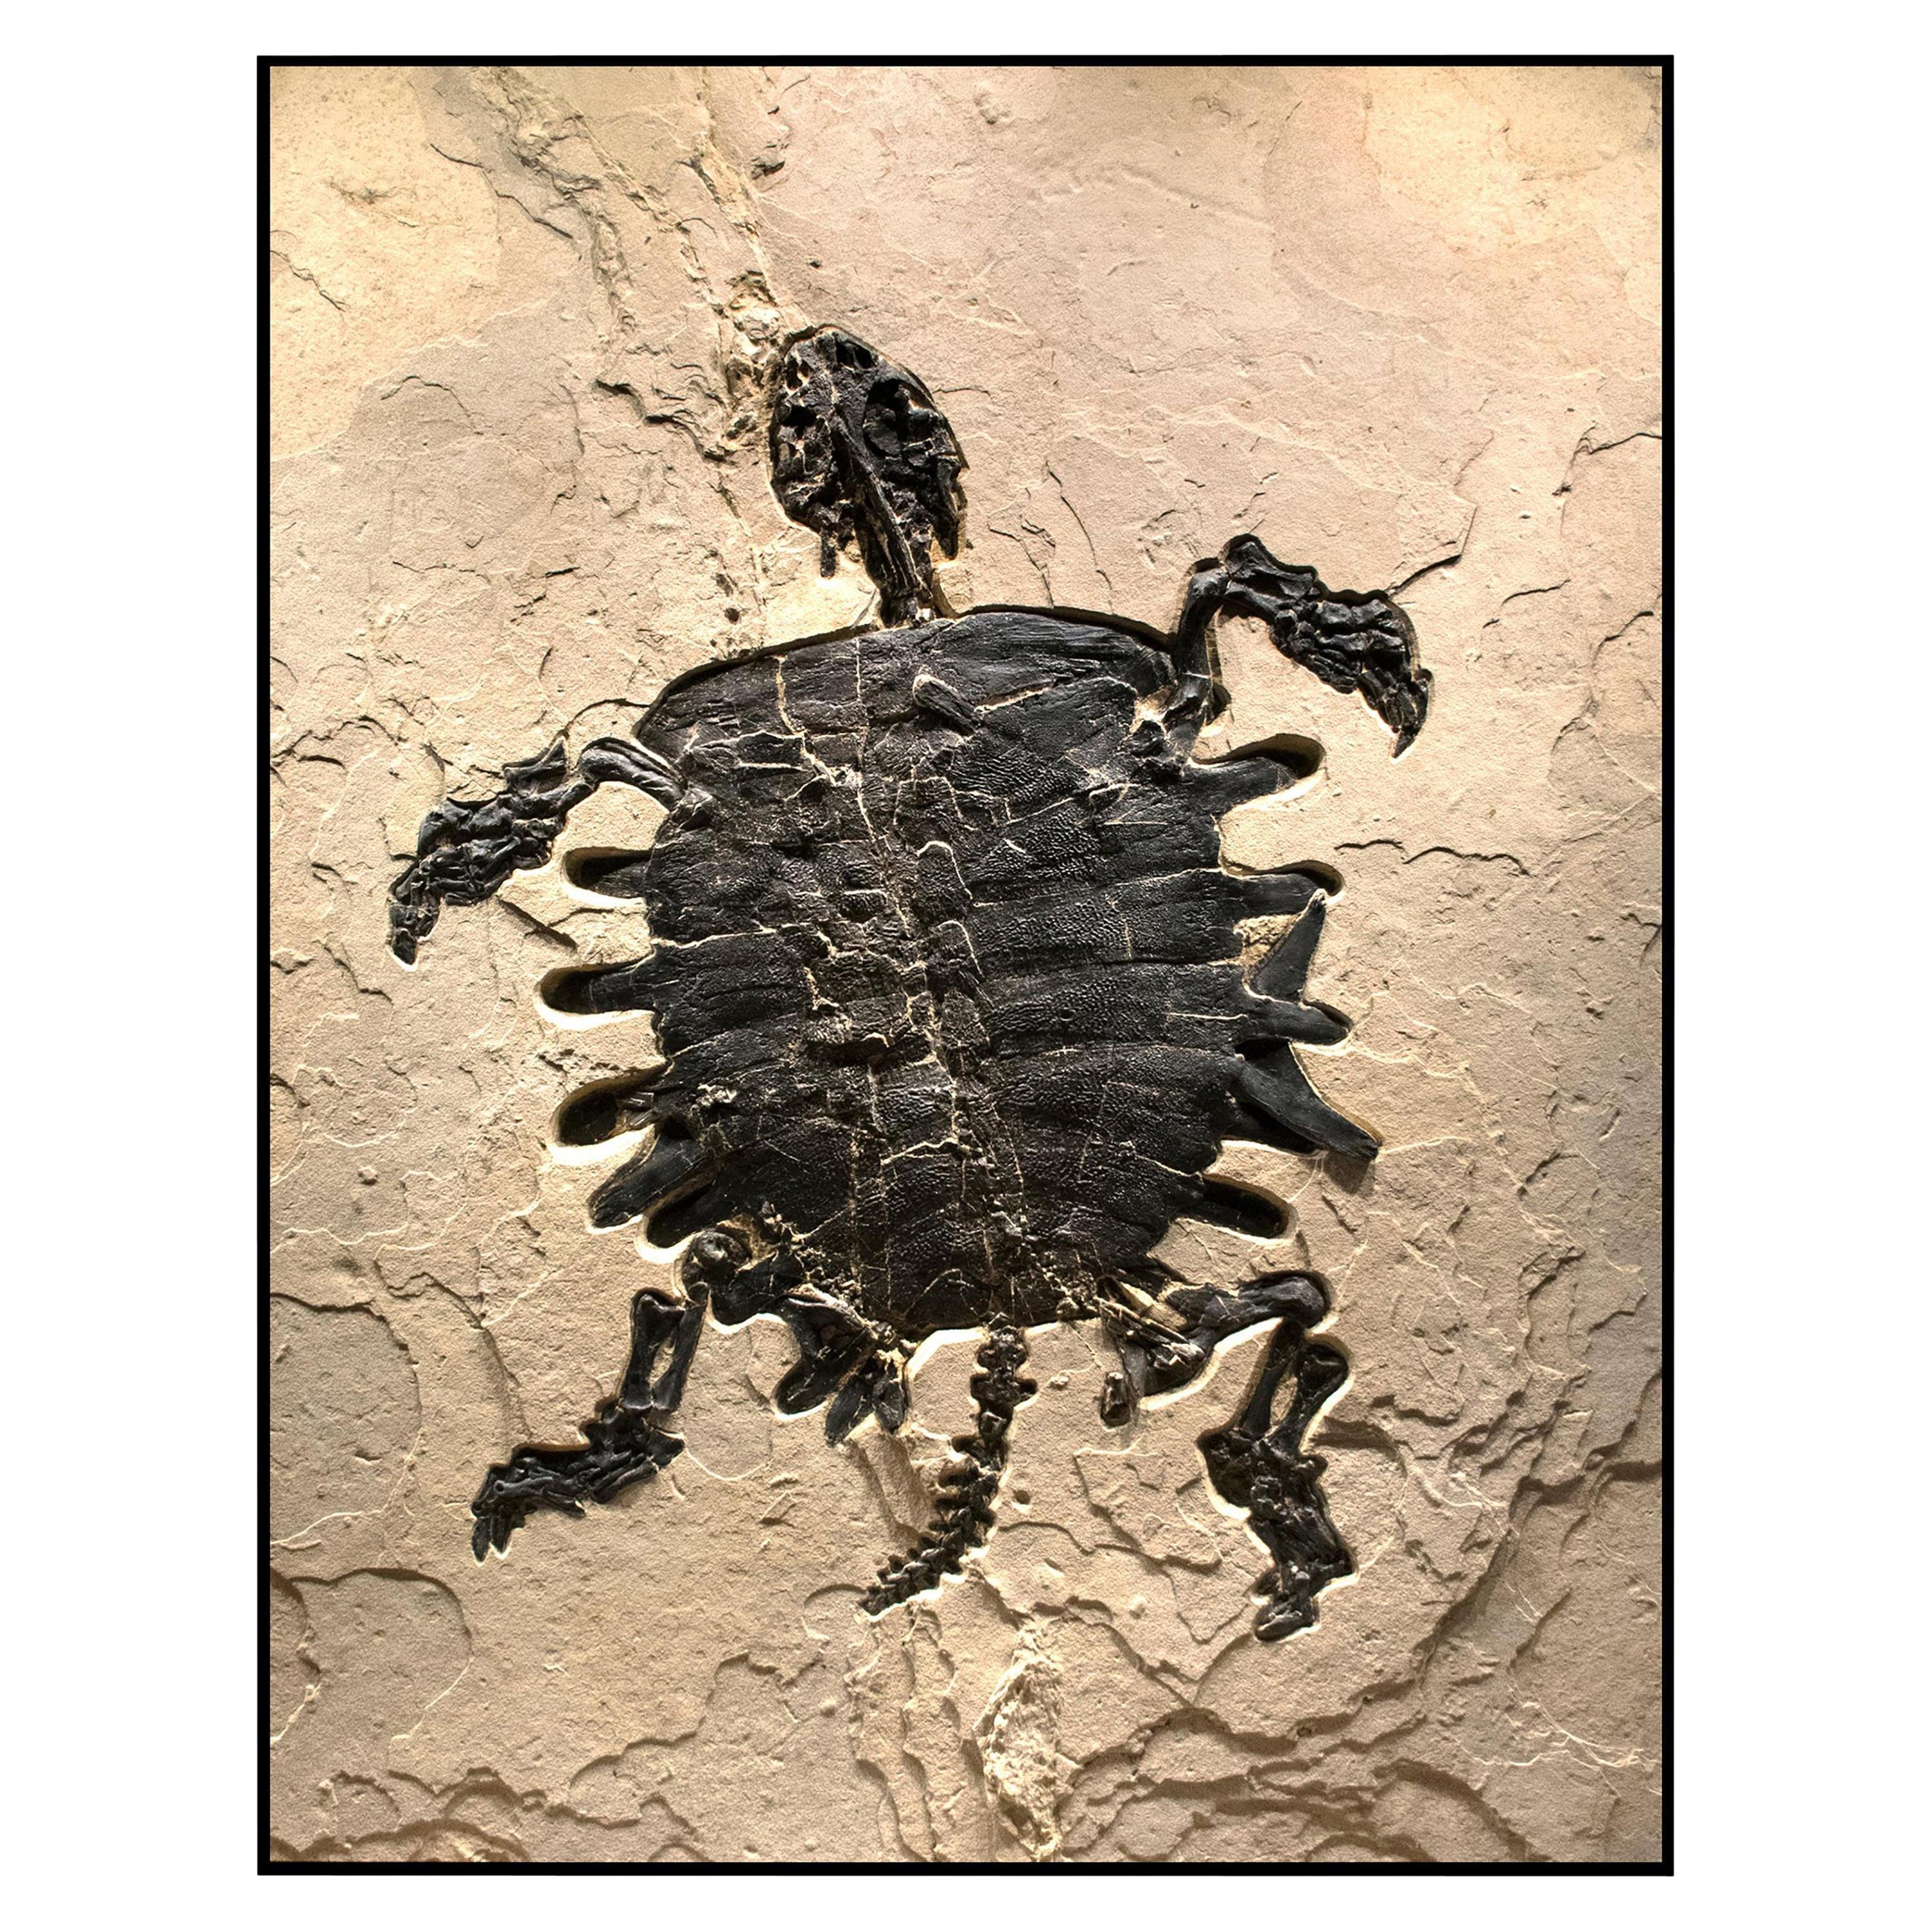 50 Million Year Old Eocene Fossil Giant Turtle Specimen in Stone, from Wyoming